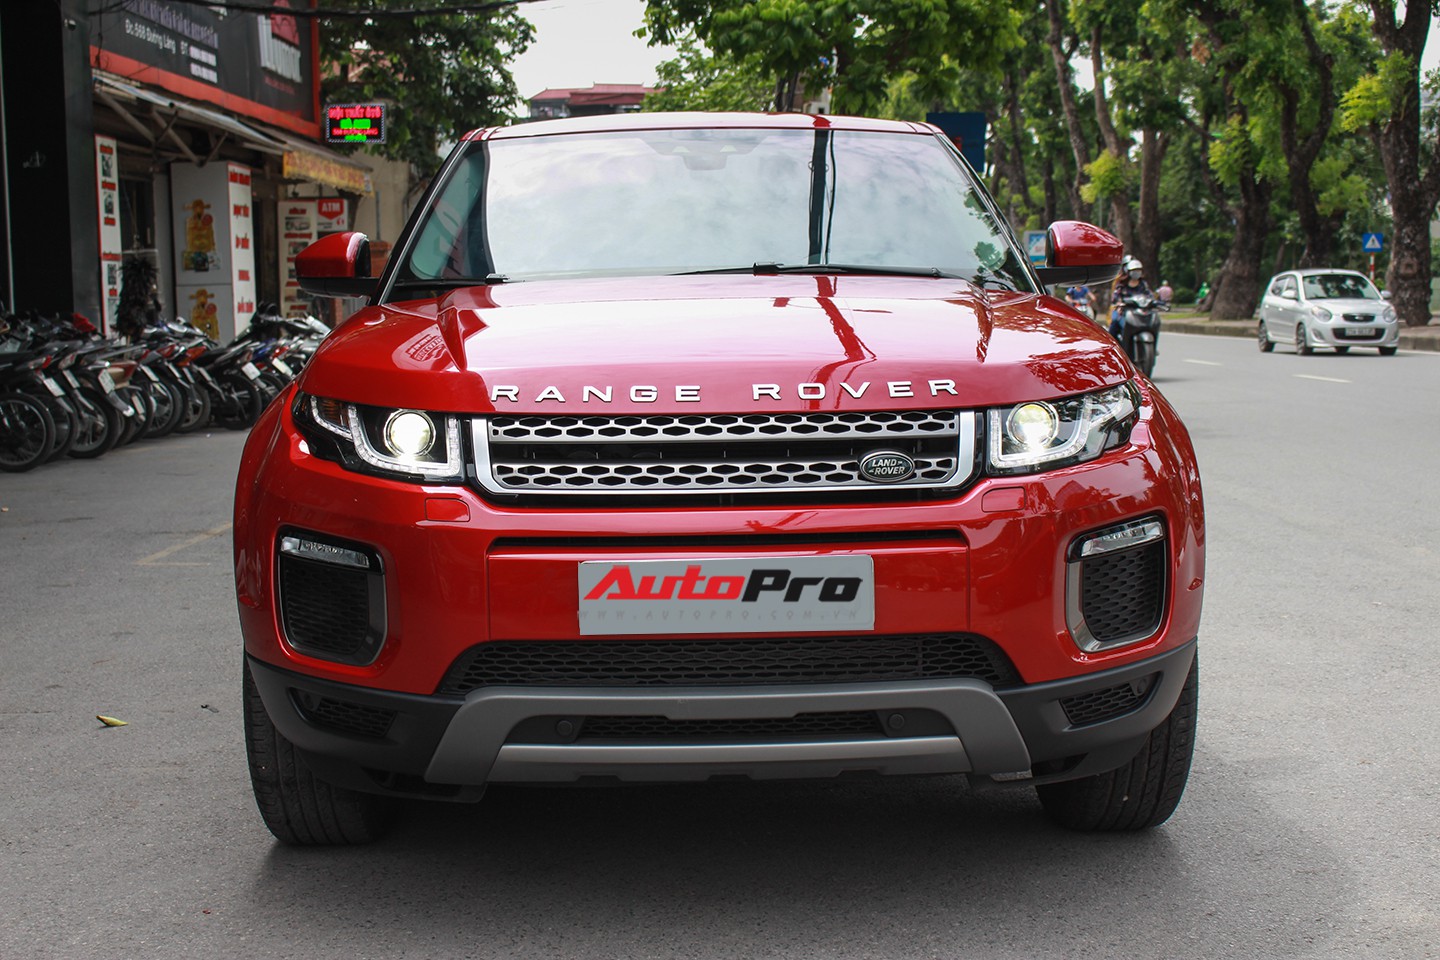 2017 Range Rover Evoque 20 diesel review interior specifications images   Introduction  Autocar India